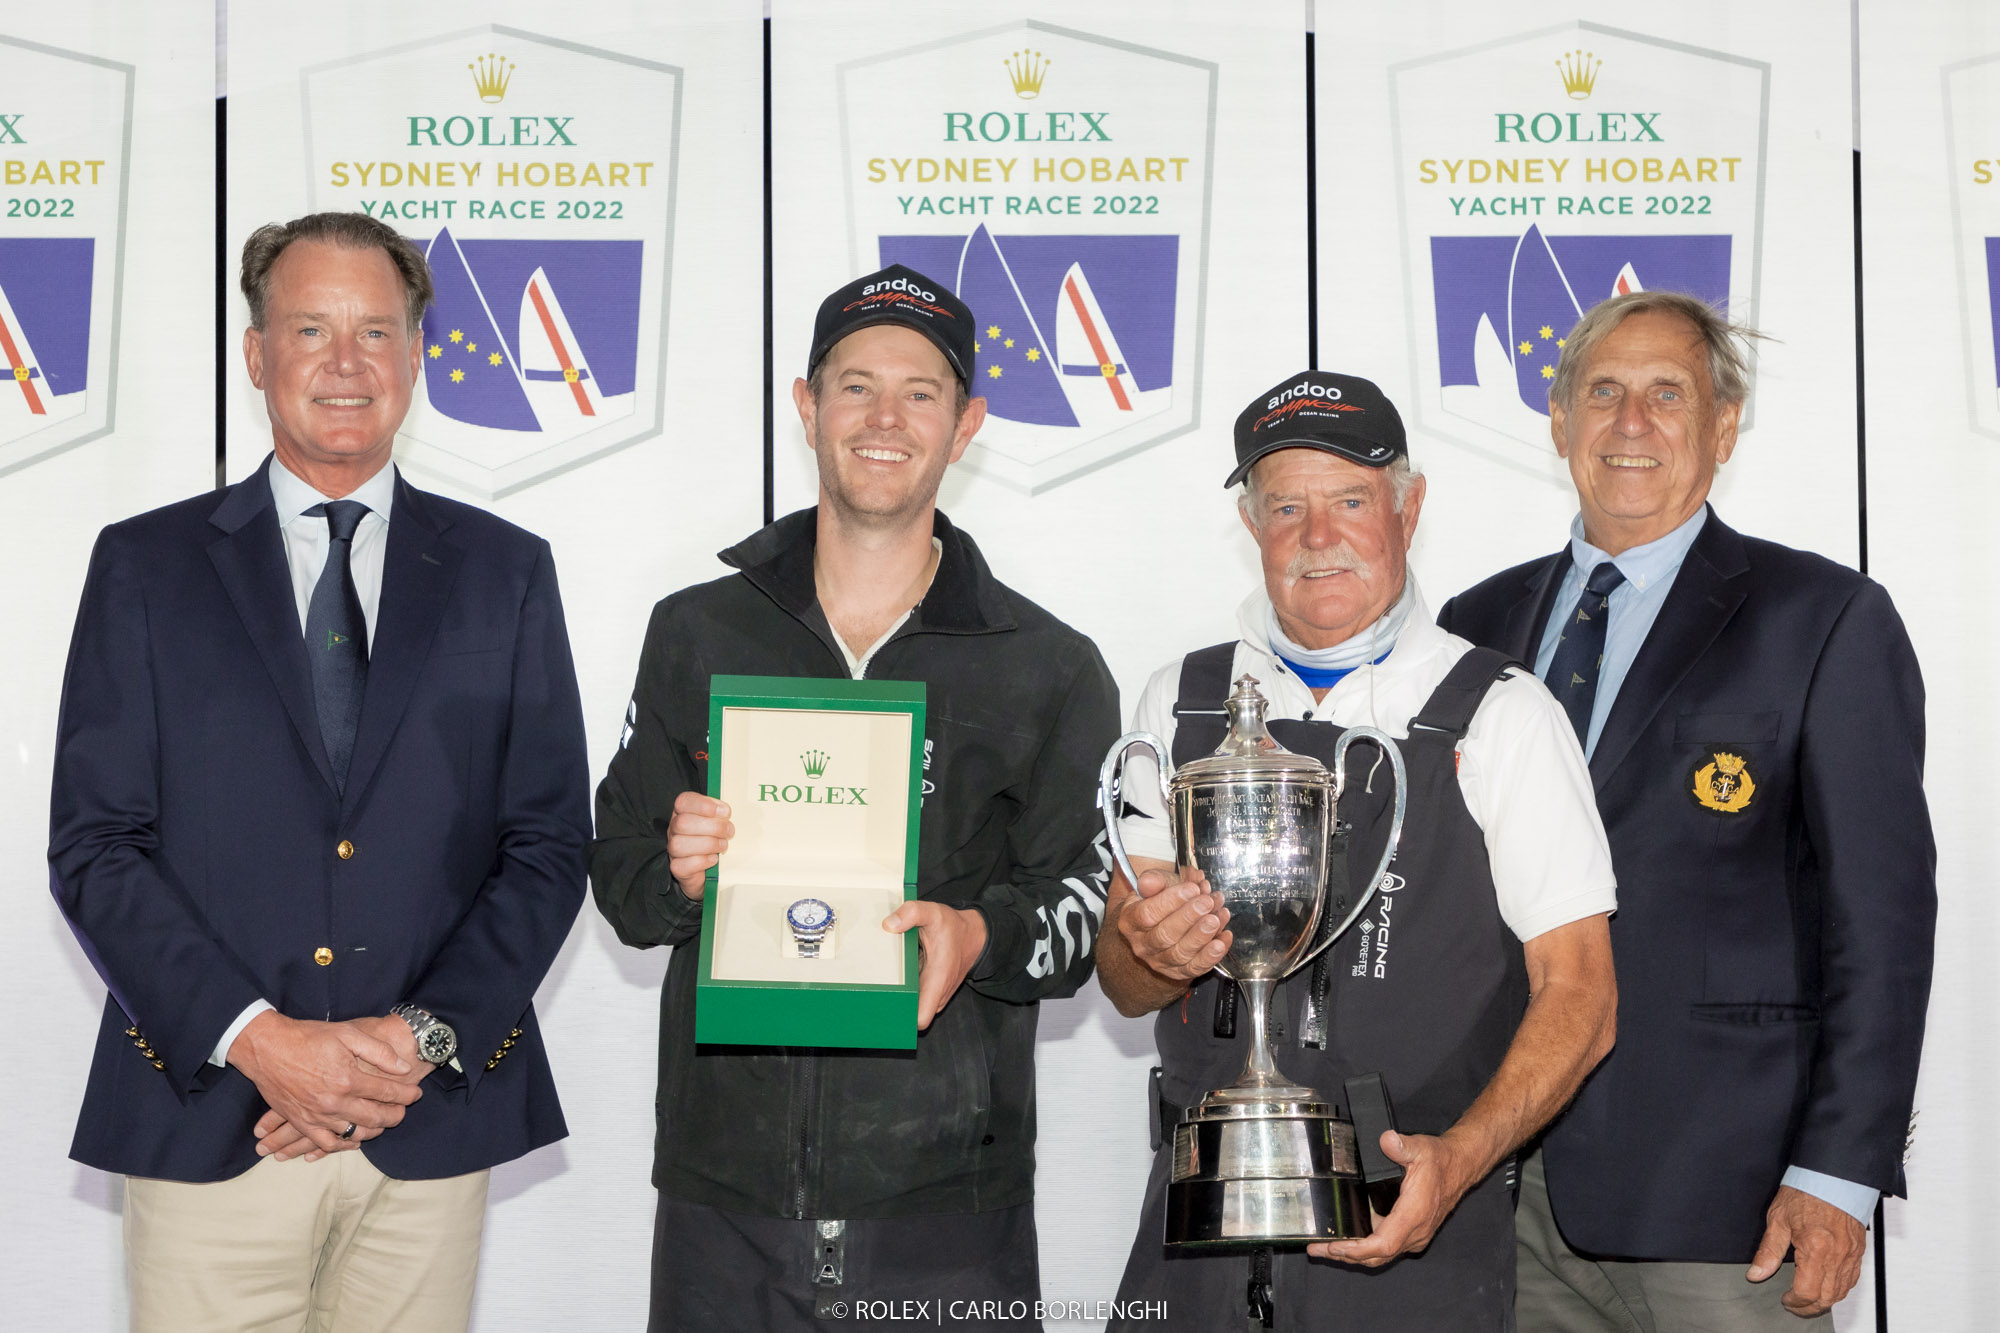  Victory for "El Comanche" at the Rolex Sydney Hobart 